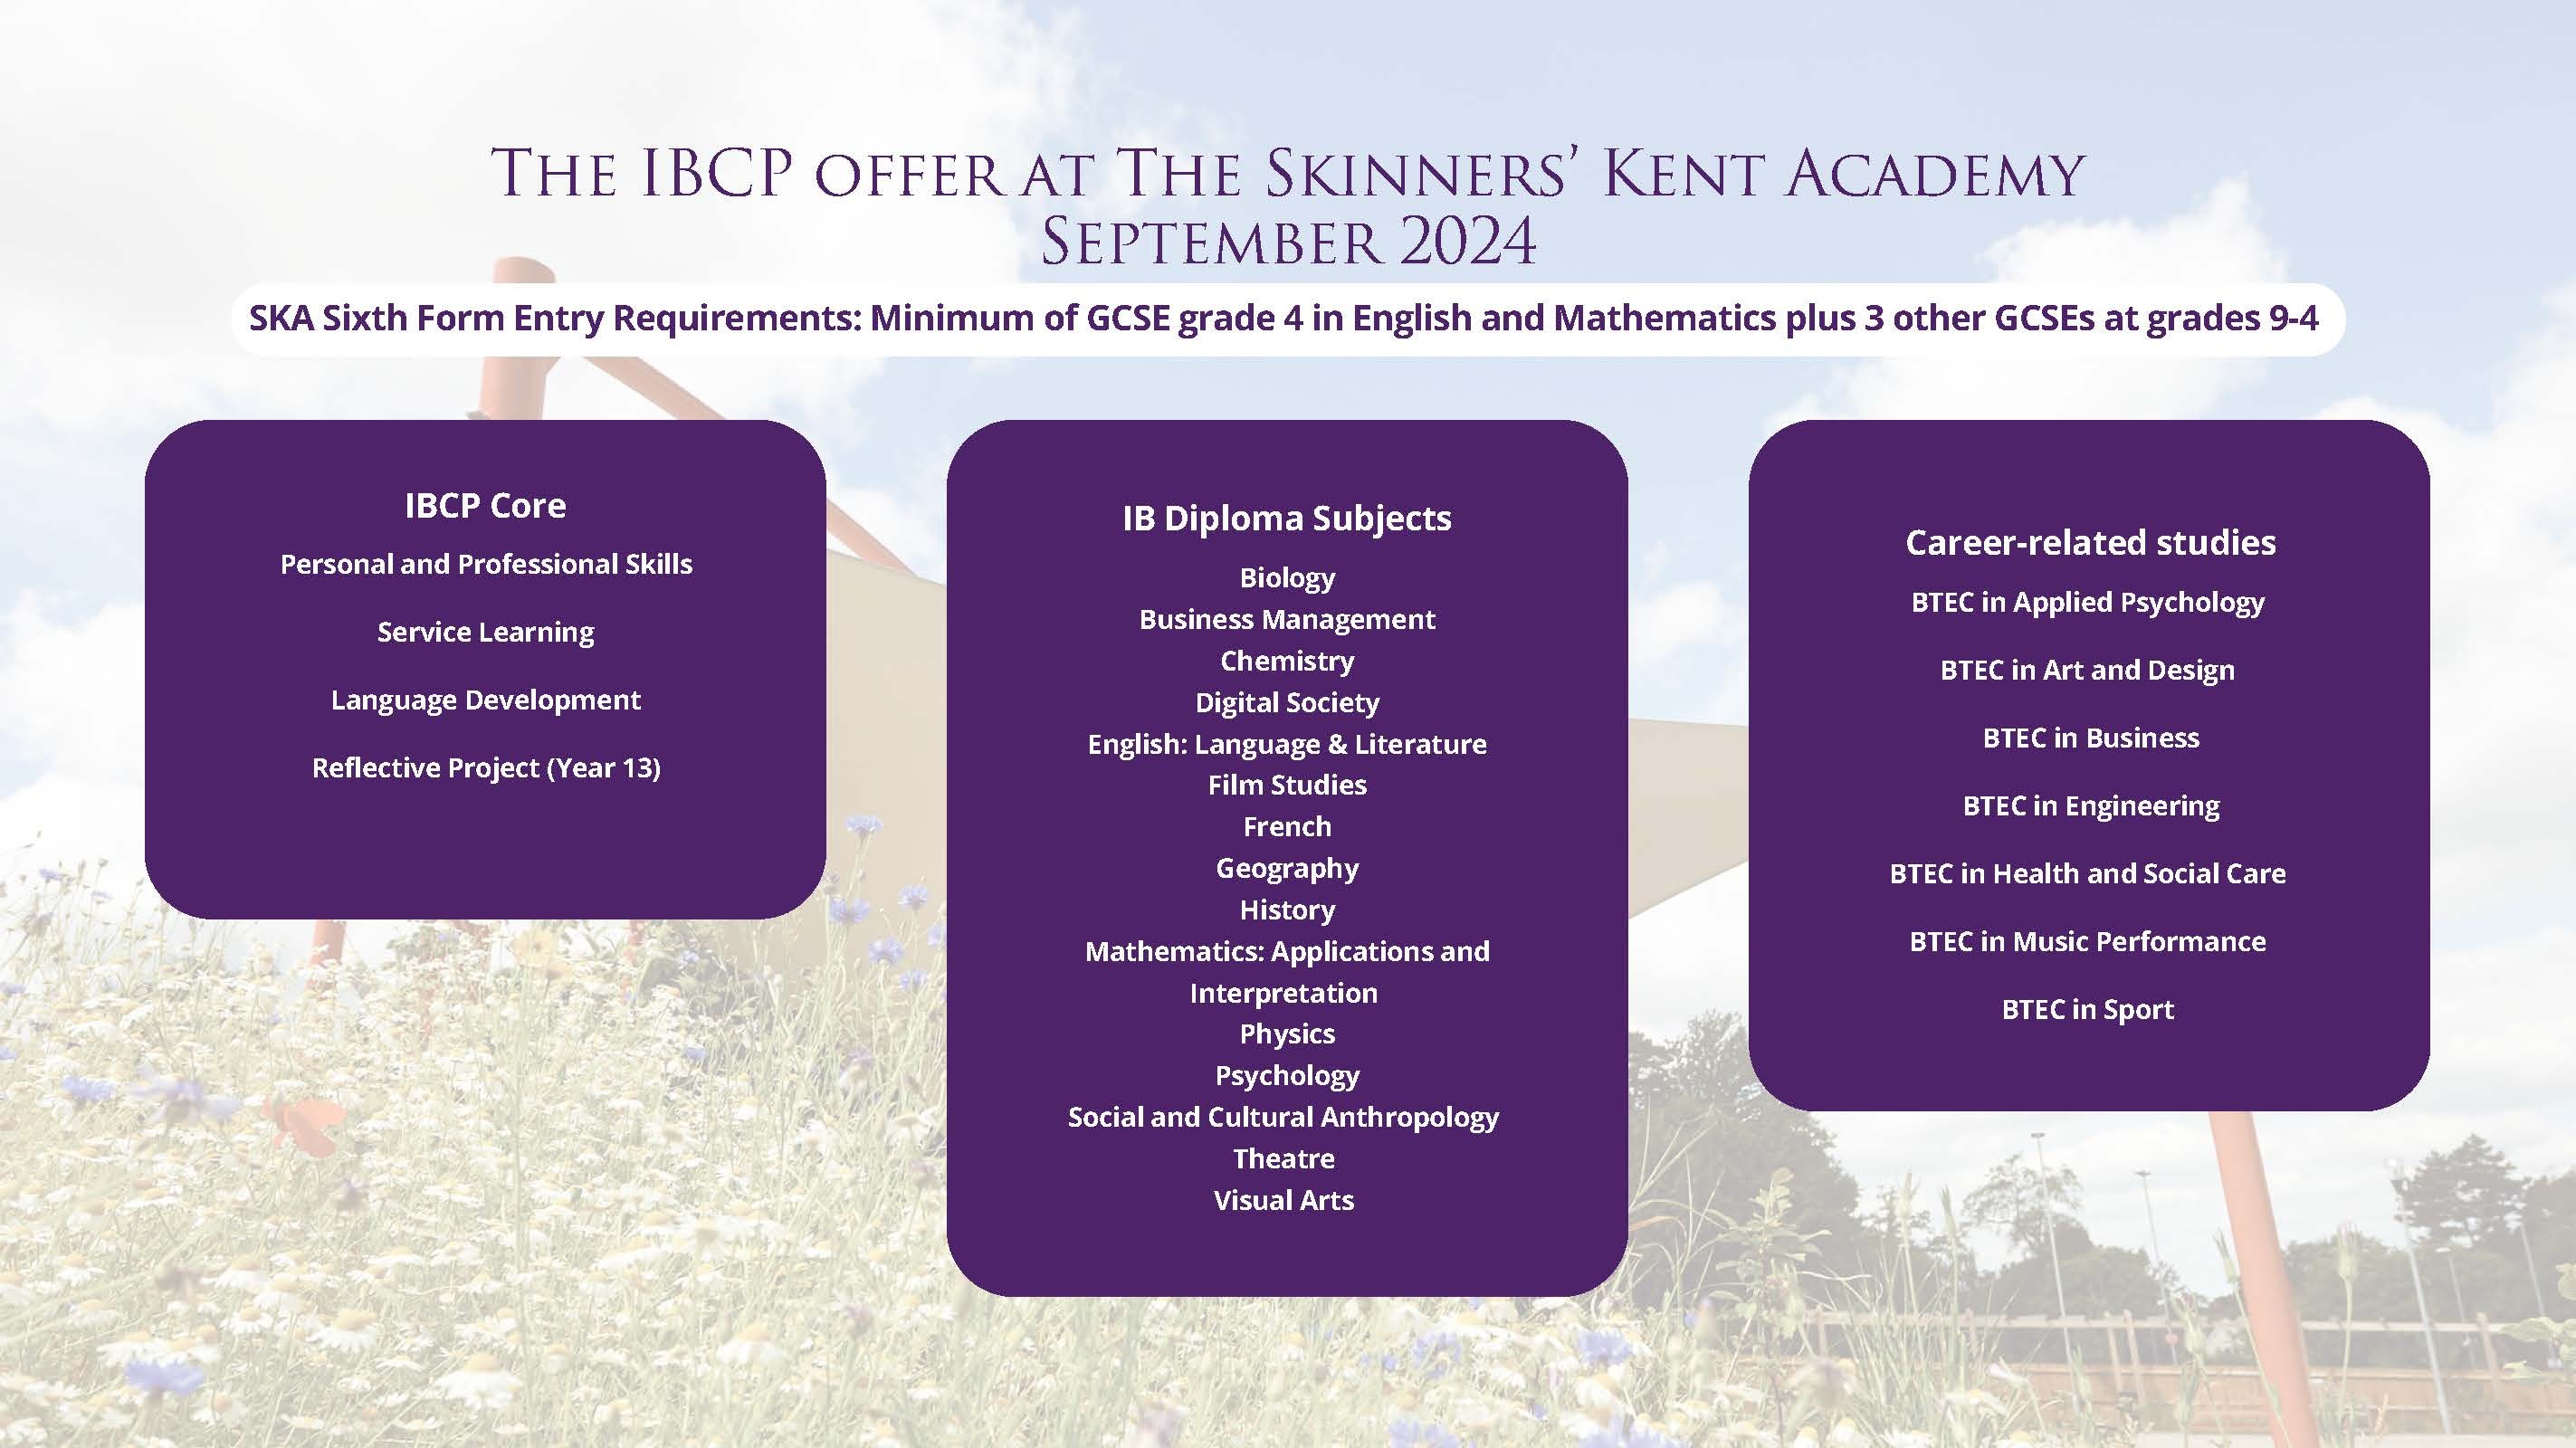 The IBCP offer at The Skinners’ Kent Academy